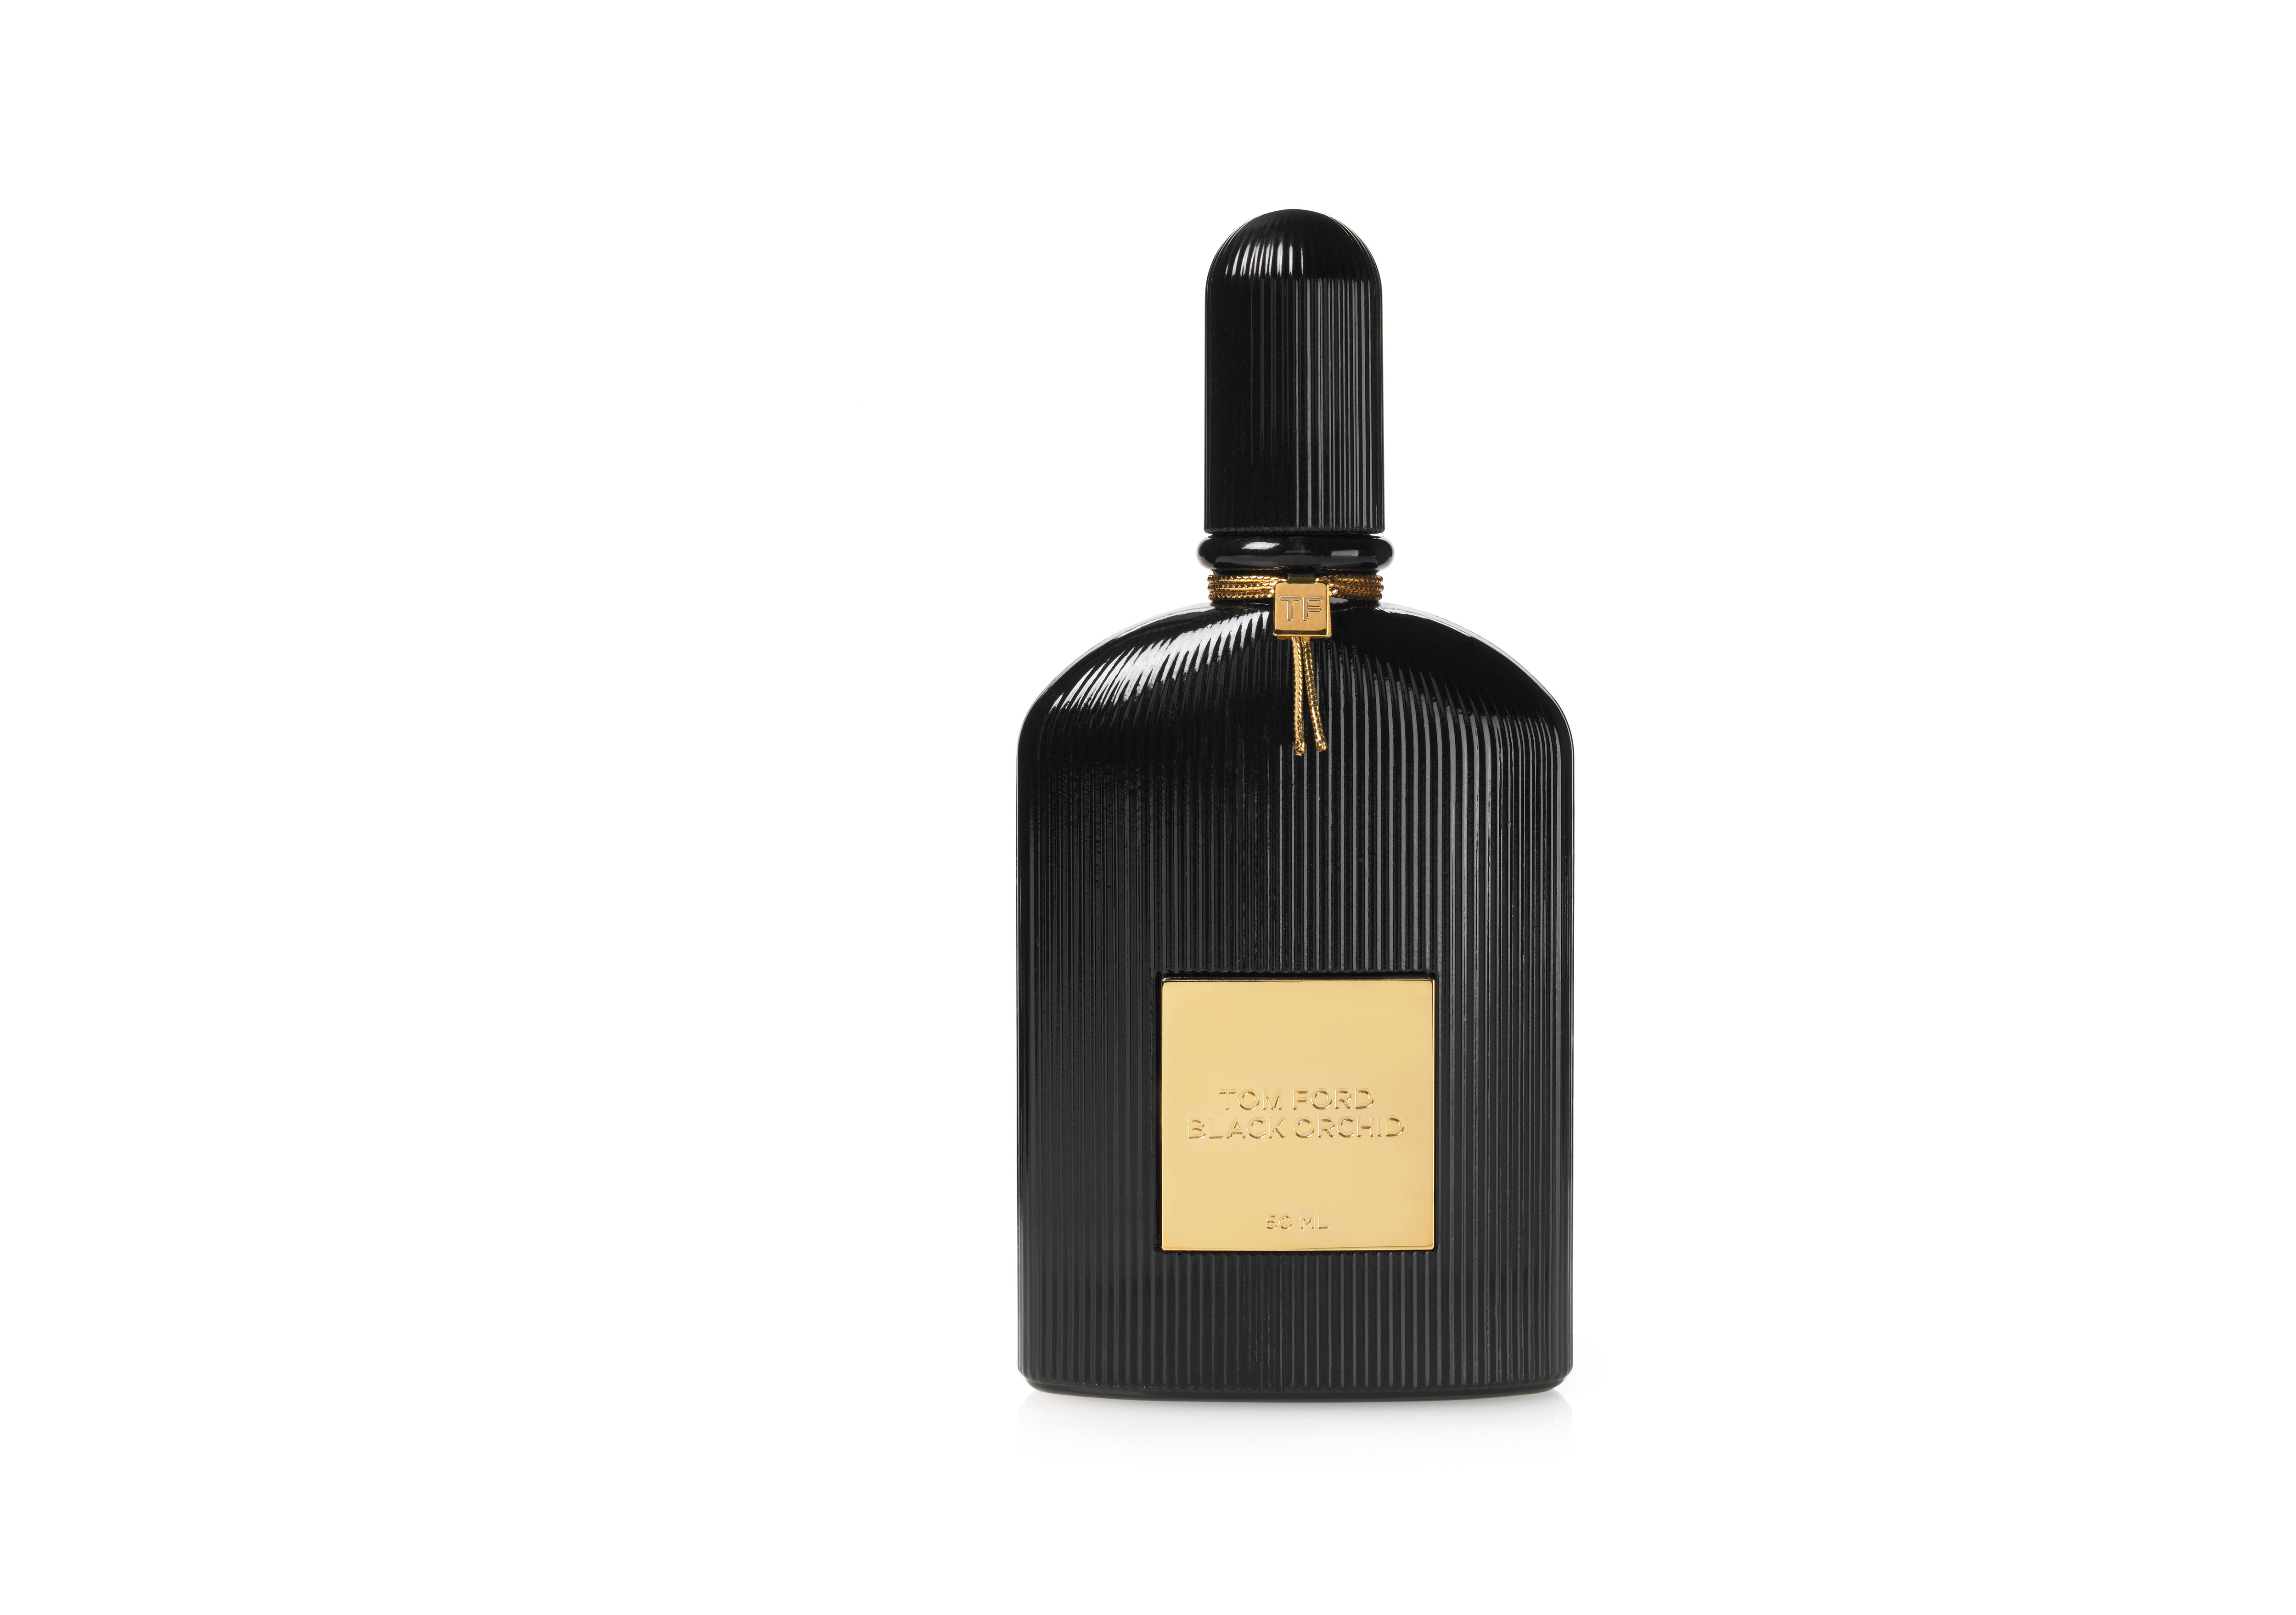 Black orchid by tom ford reviews #8